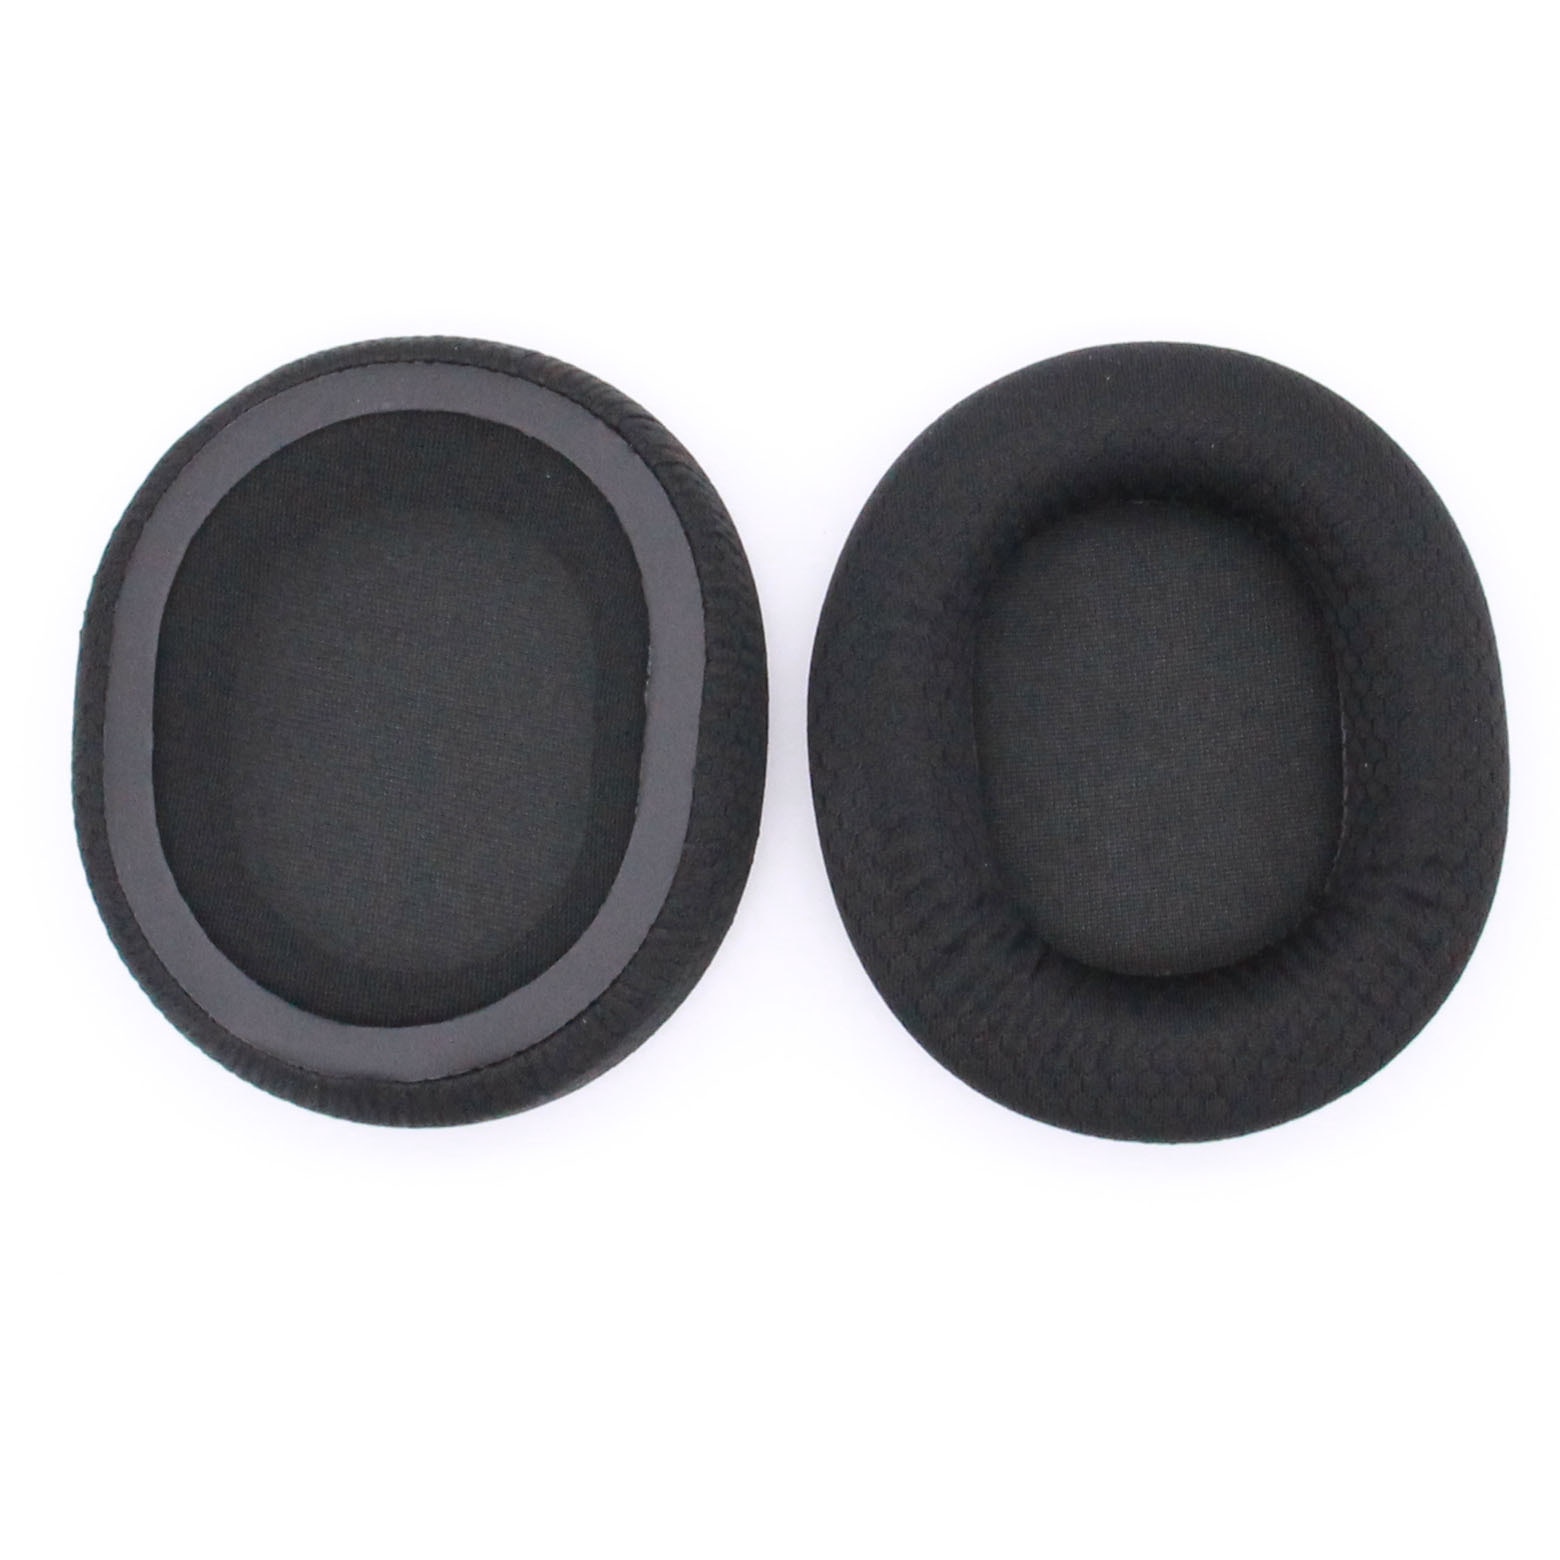 SteelSeries Arctis Gaming Headset Replacement Ear Pads